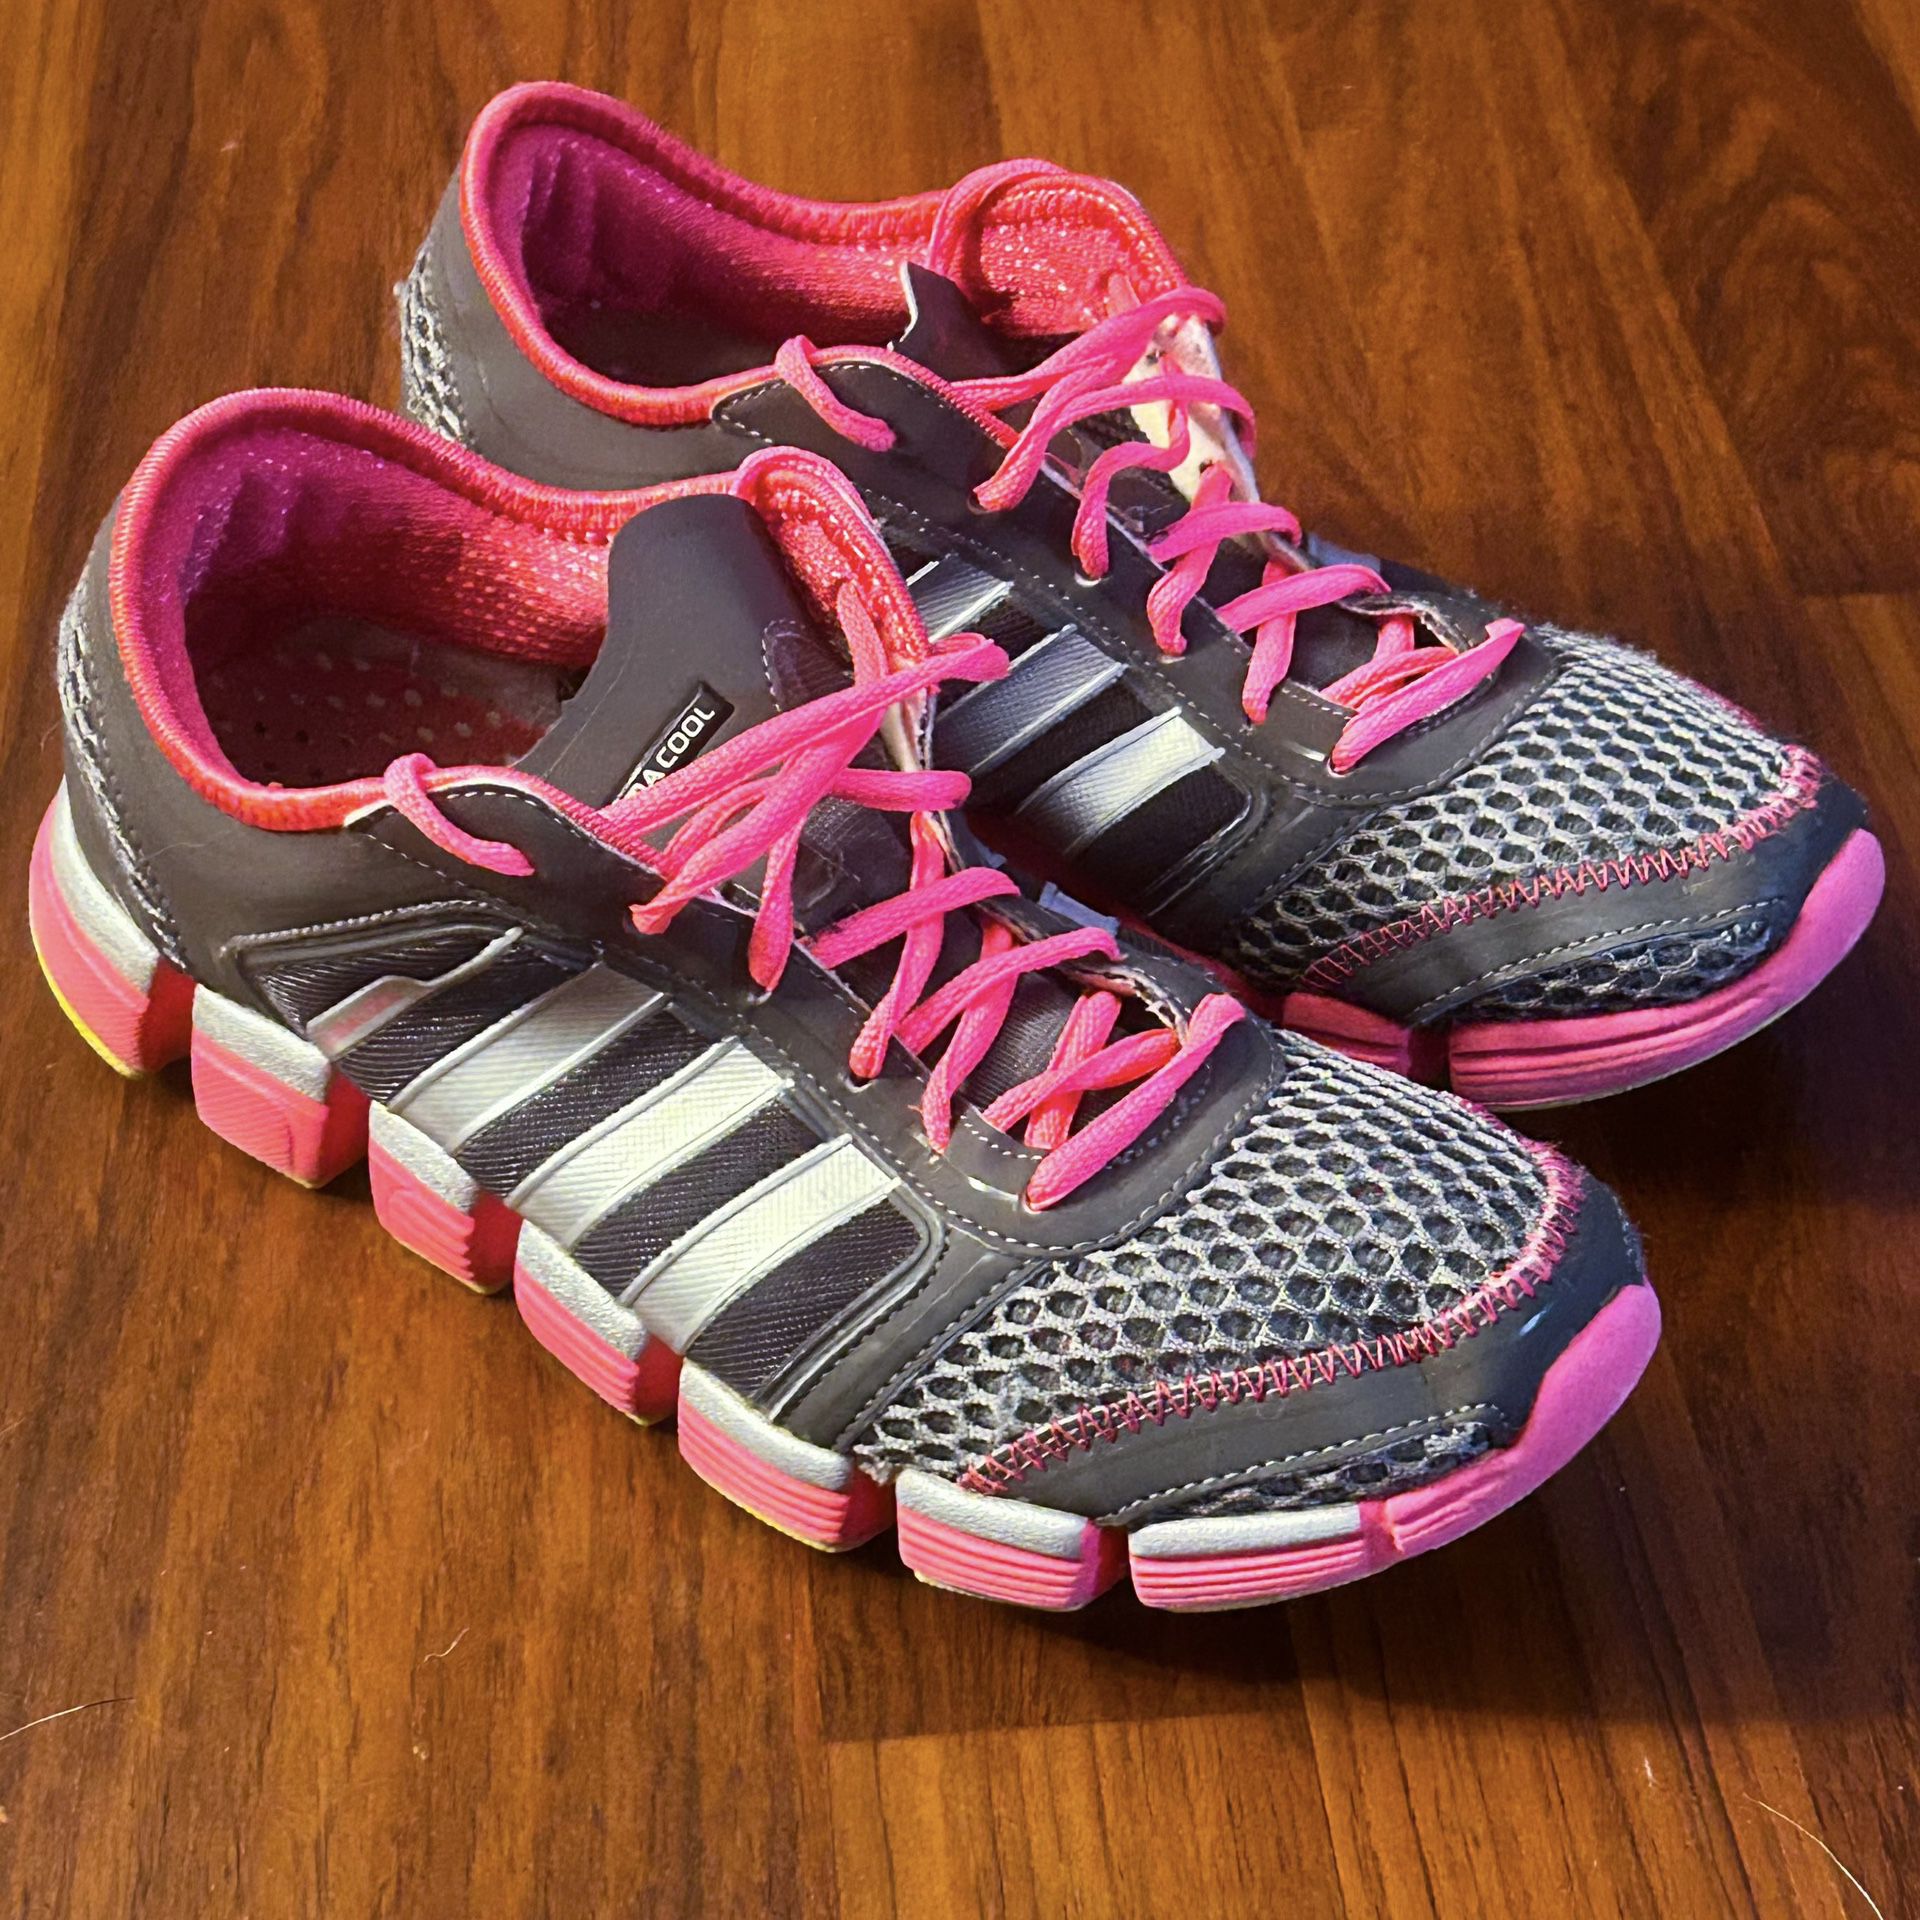 Adidas Climacool Women’s Gray/Pink Shoes Size 10